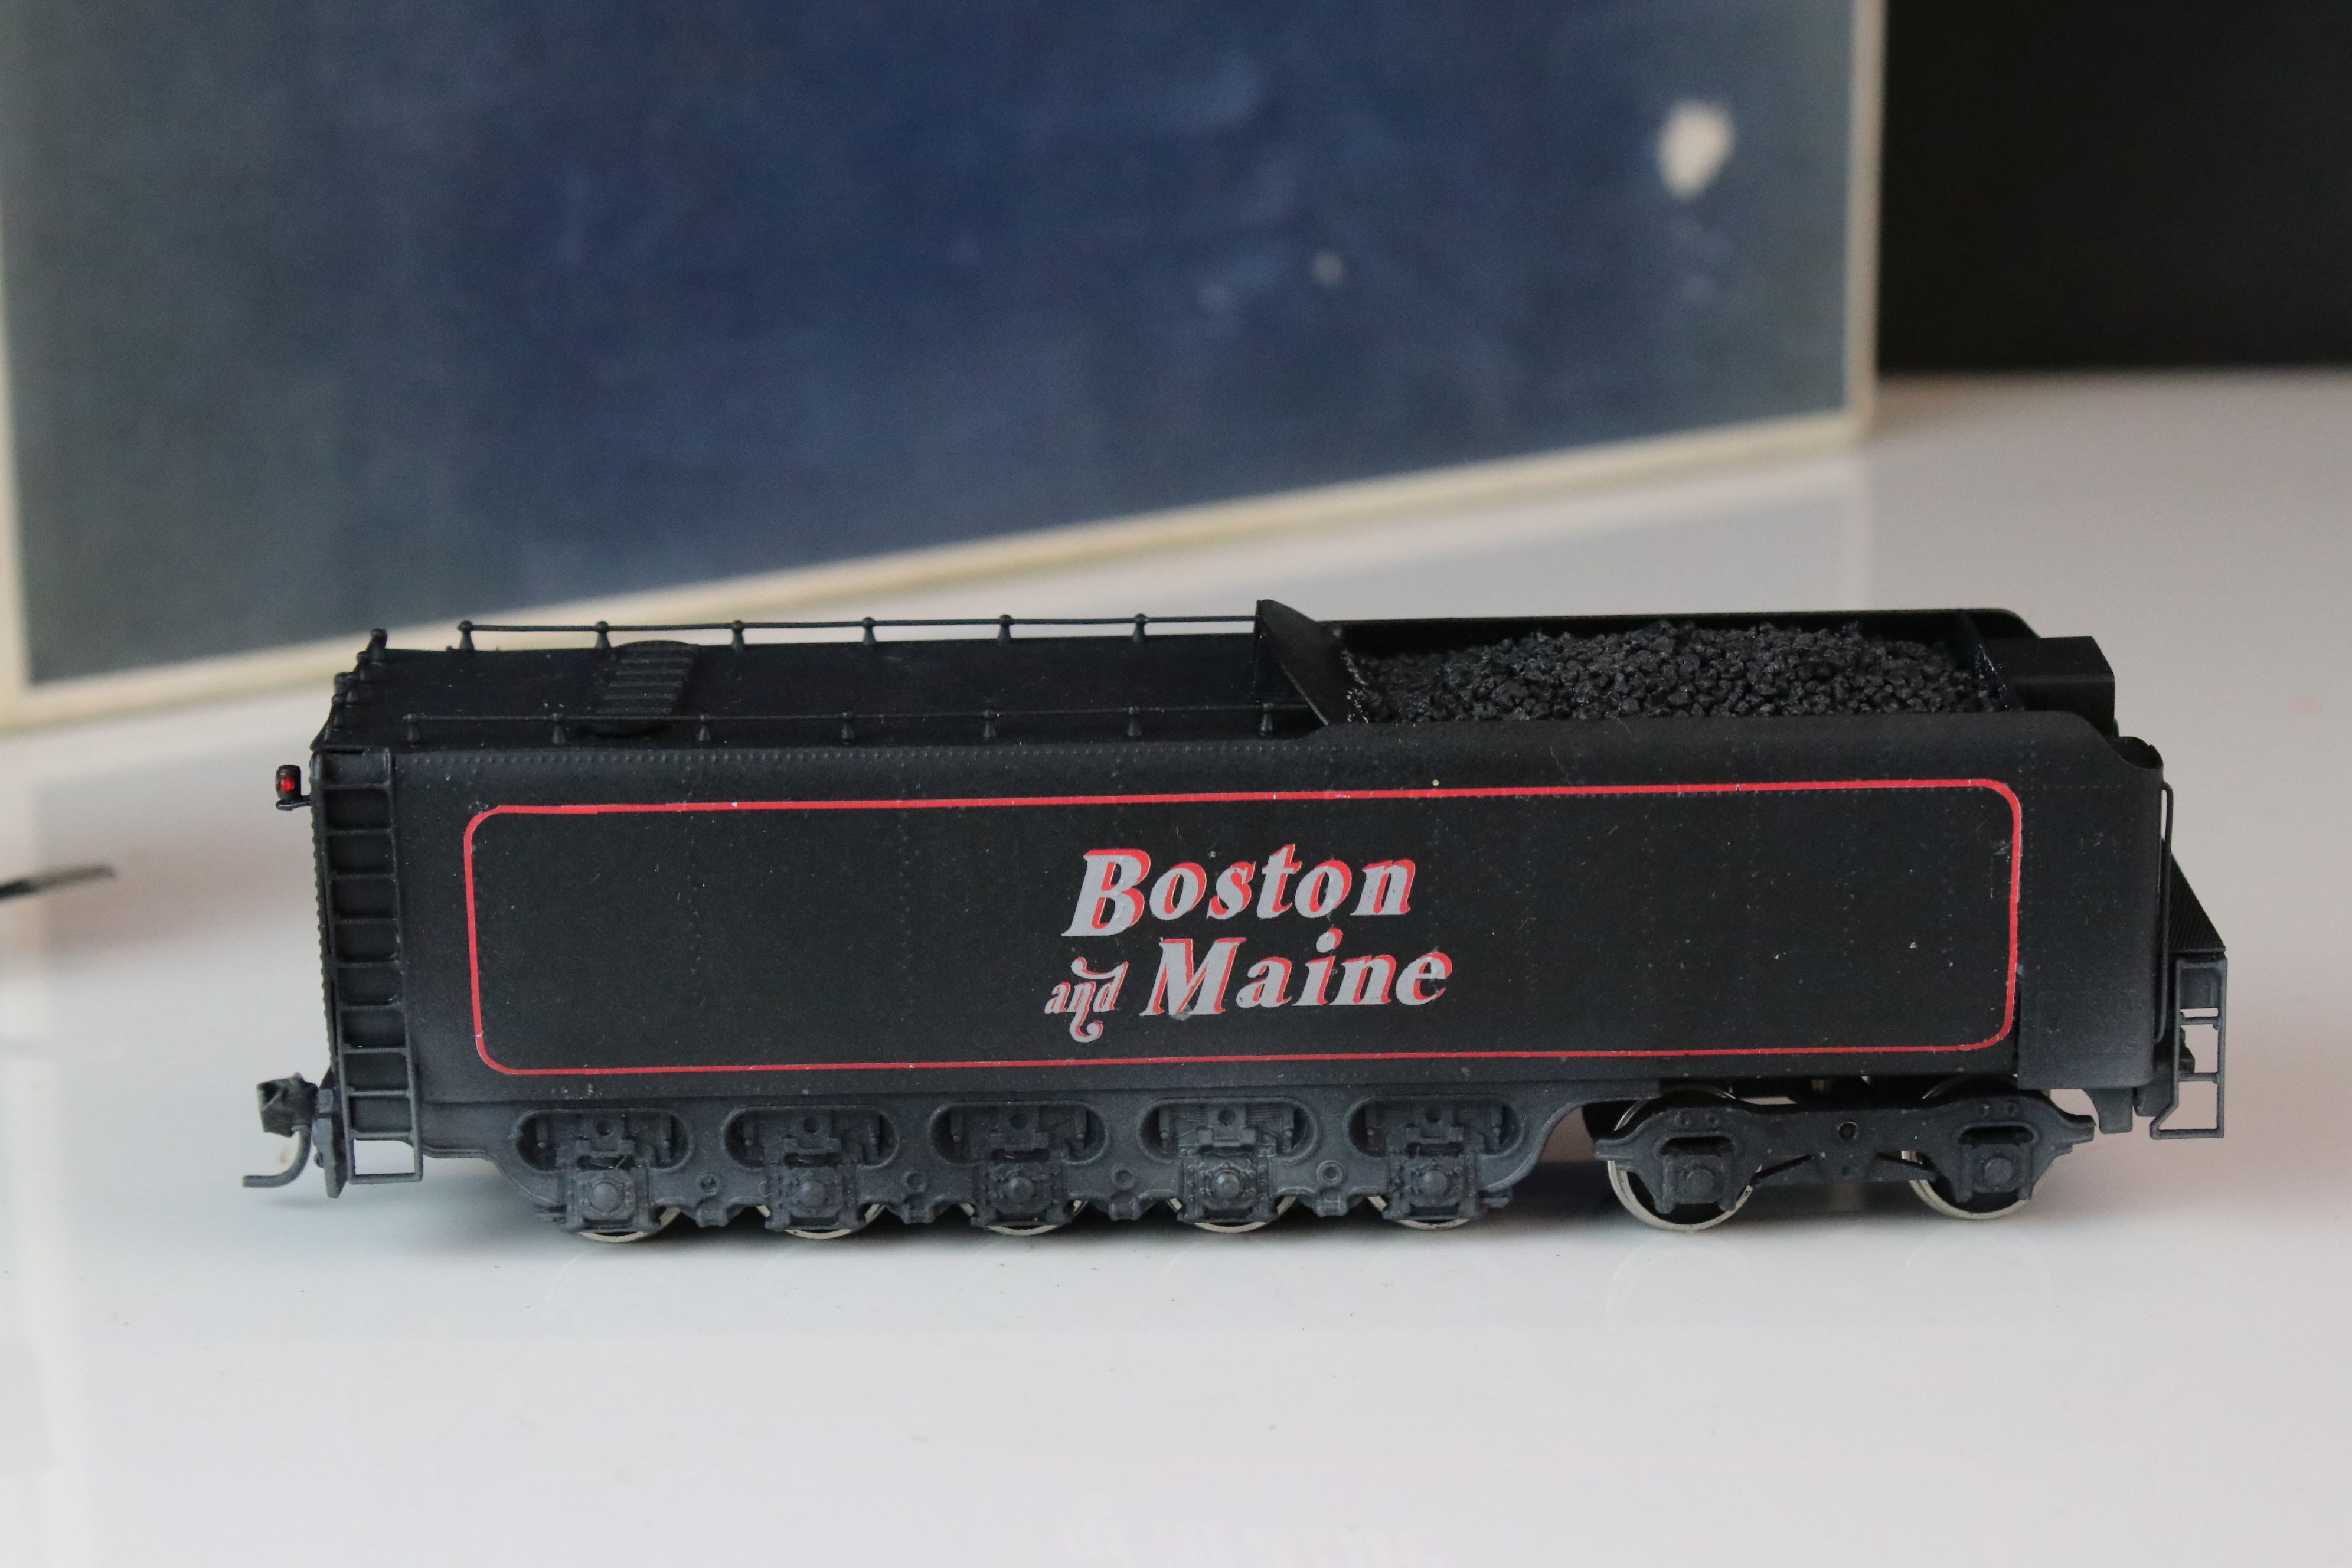 Boxed Olympia HO gauge Boston & Maine Class R1-d 4-8-2 4113 locomotive & tender, painted, - Image 9 of 14